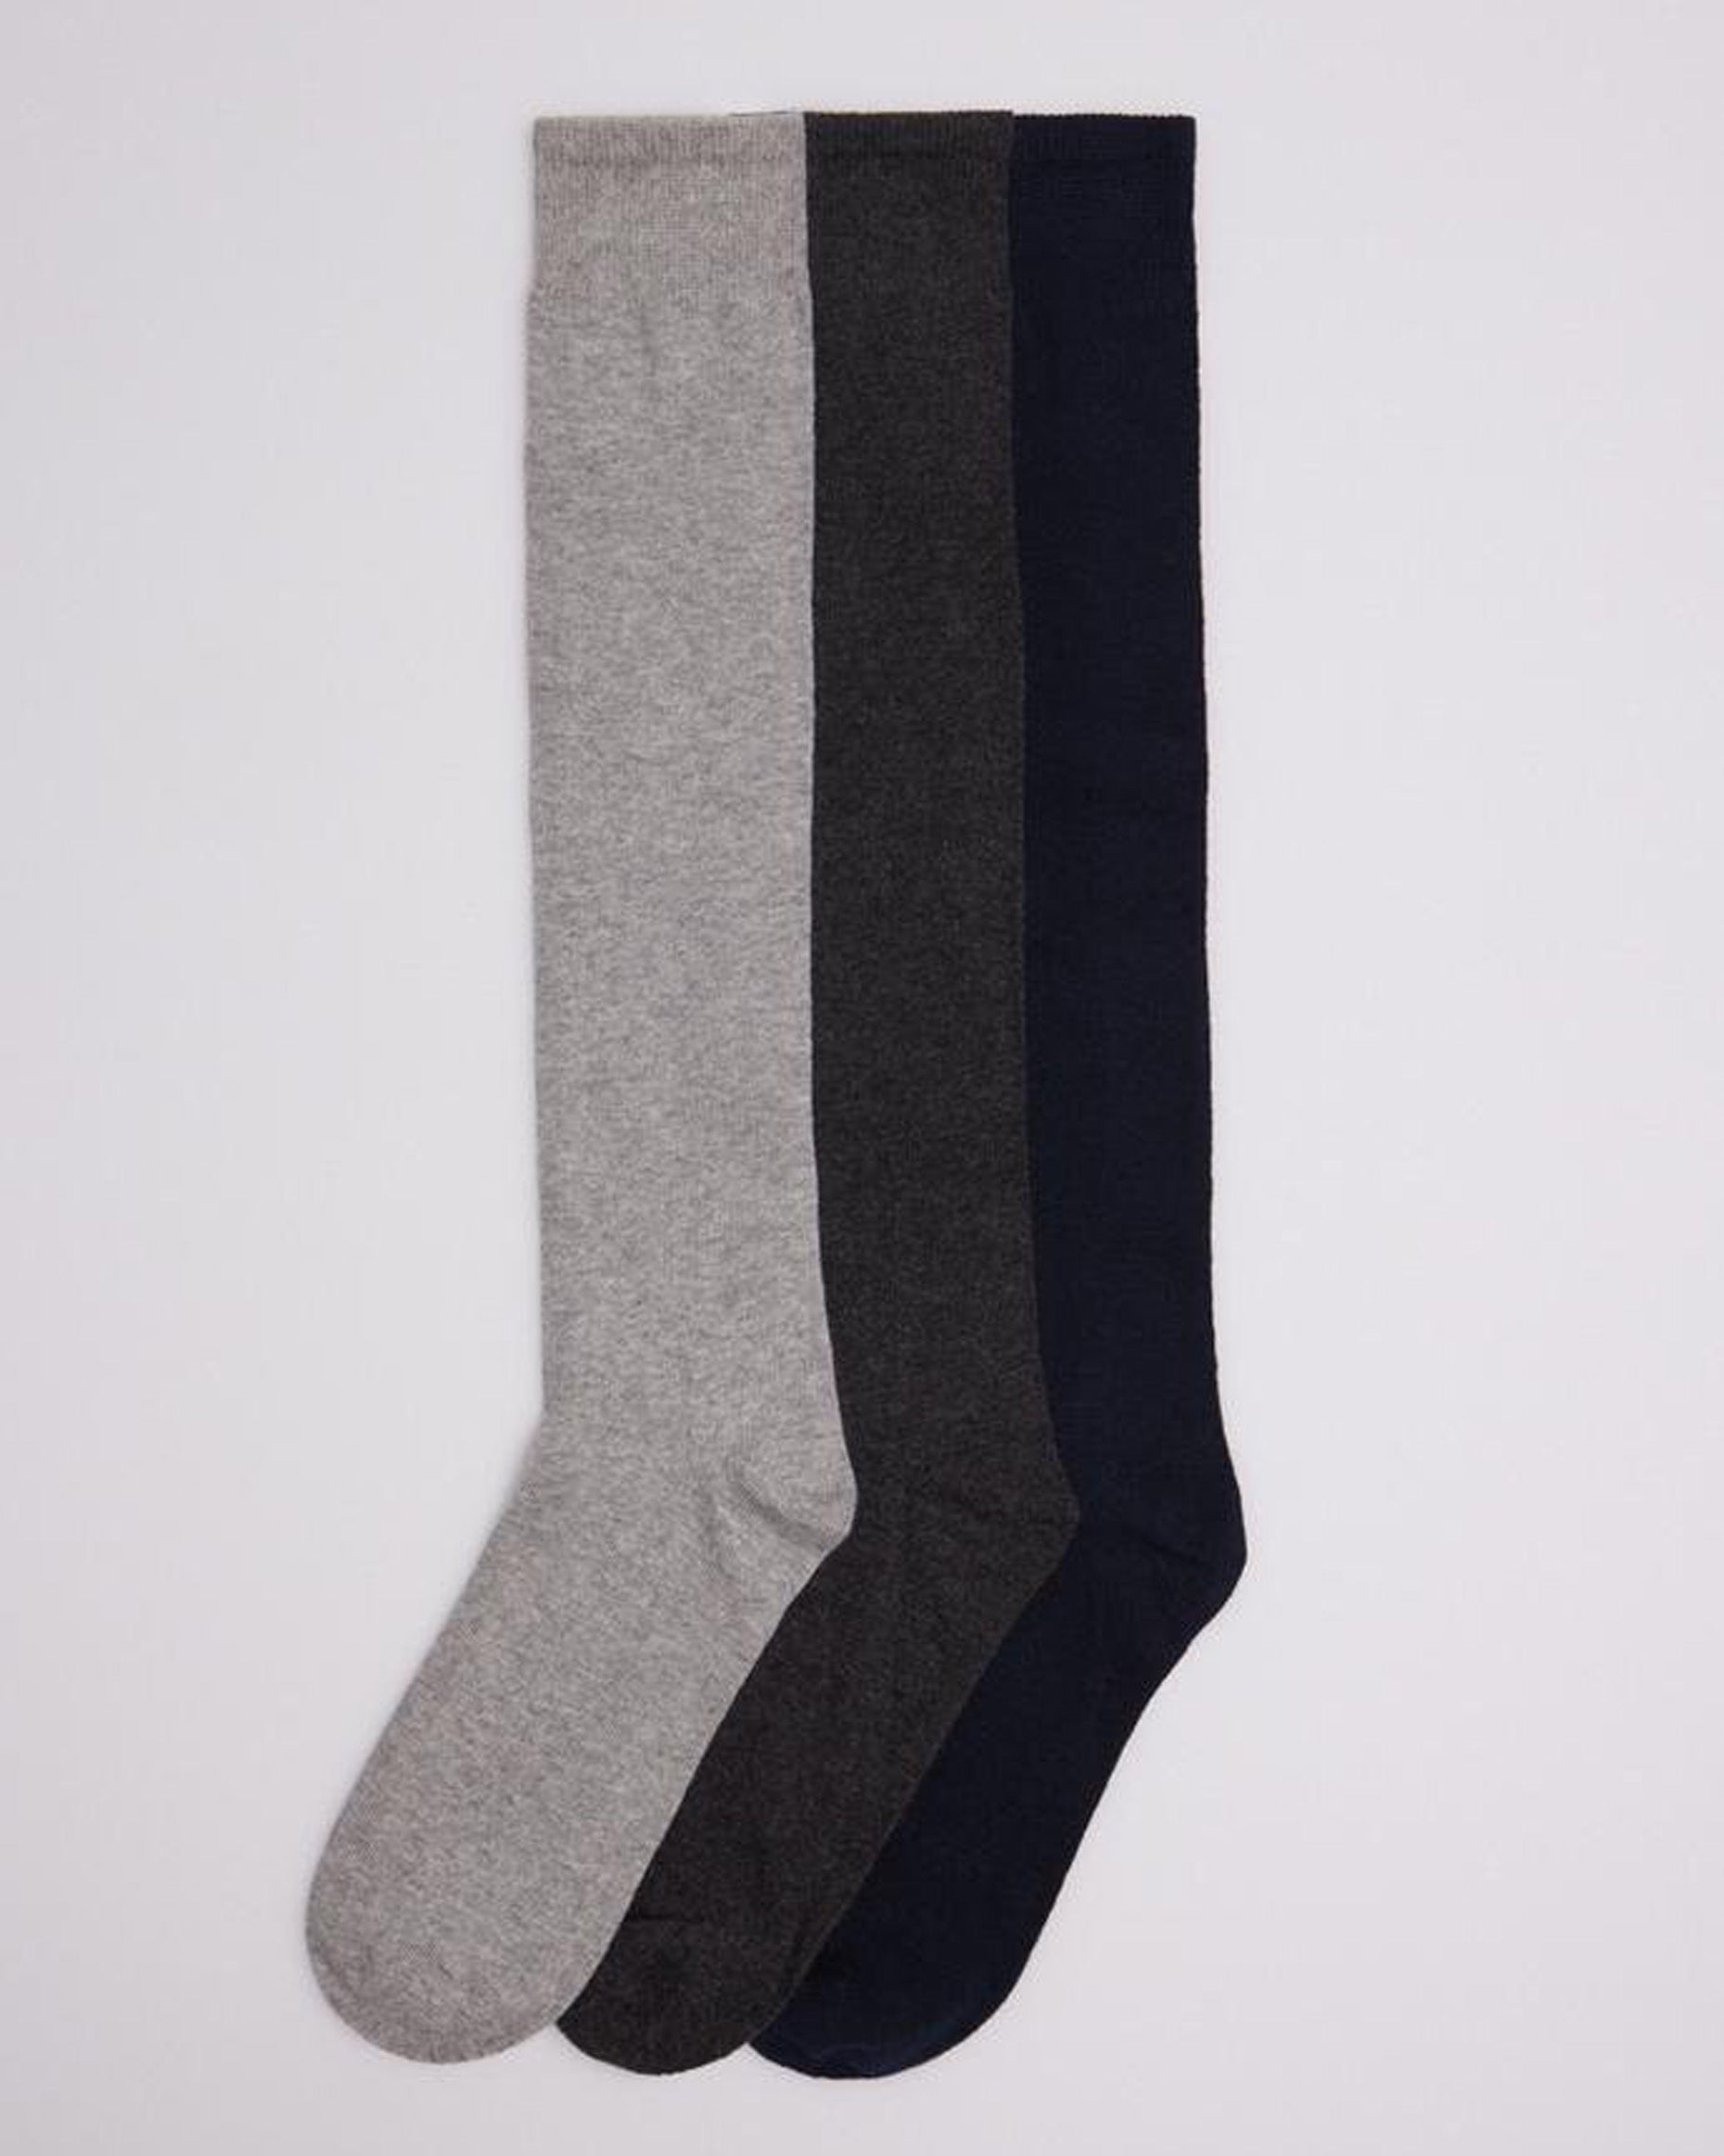 Ysabel Mora 12374 Cotton Knee-Highs - Black cotton knee-high socks with an elasticated comfort cuff, flat toe seams and shaped heel in light grey, dark grey and navy blue.